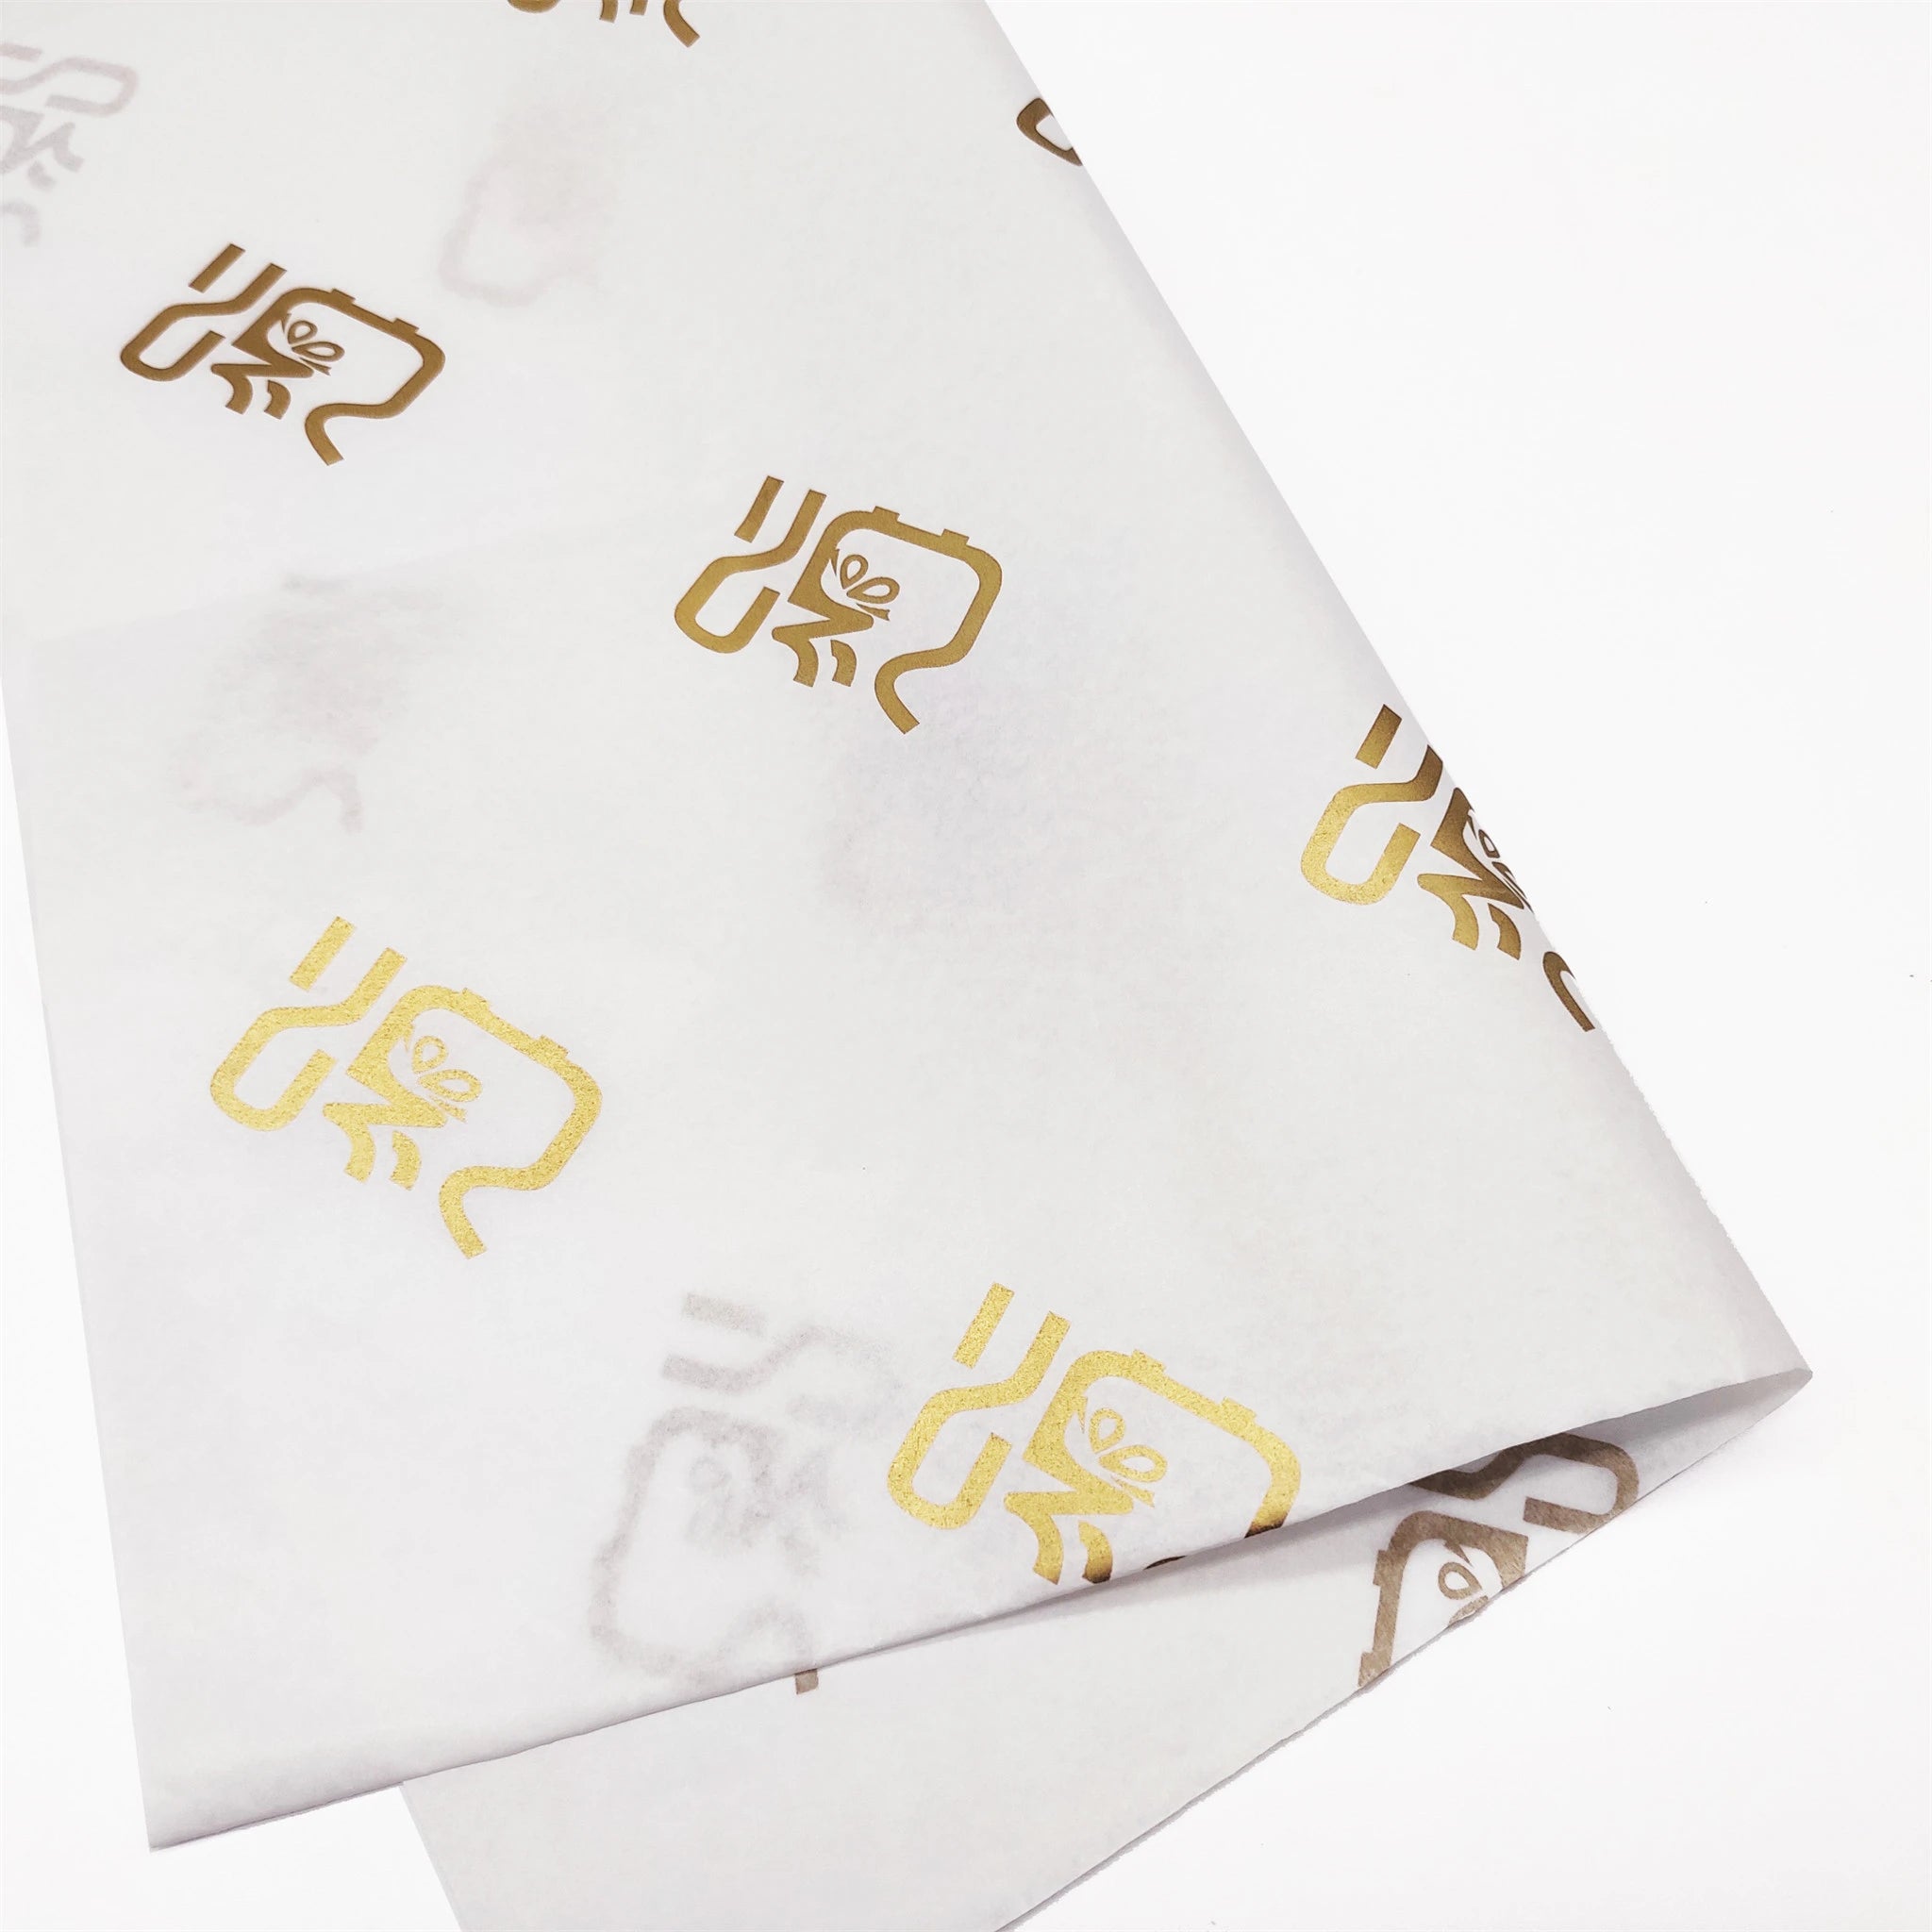 gold logo printed on 20lb tissue paper